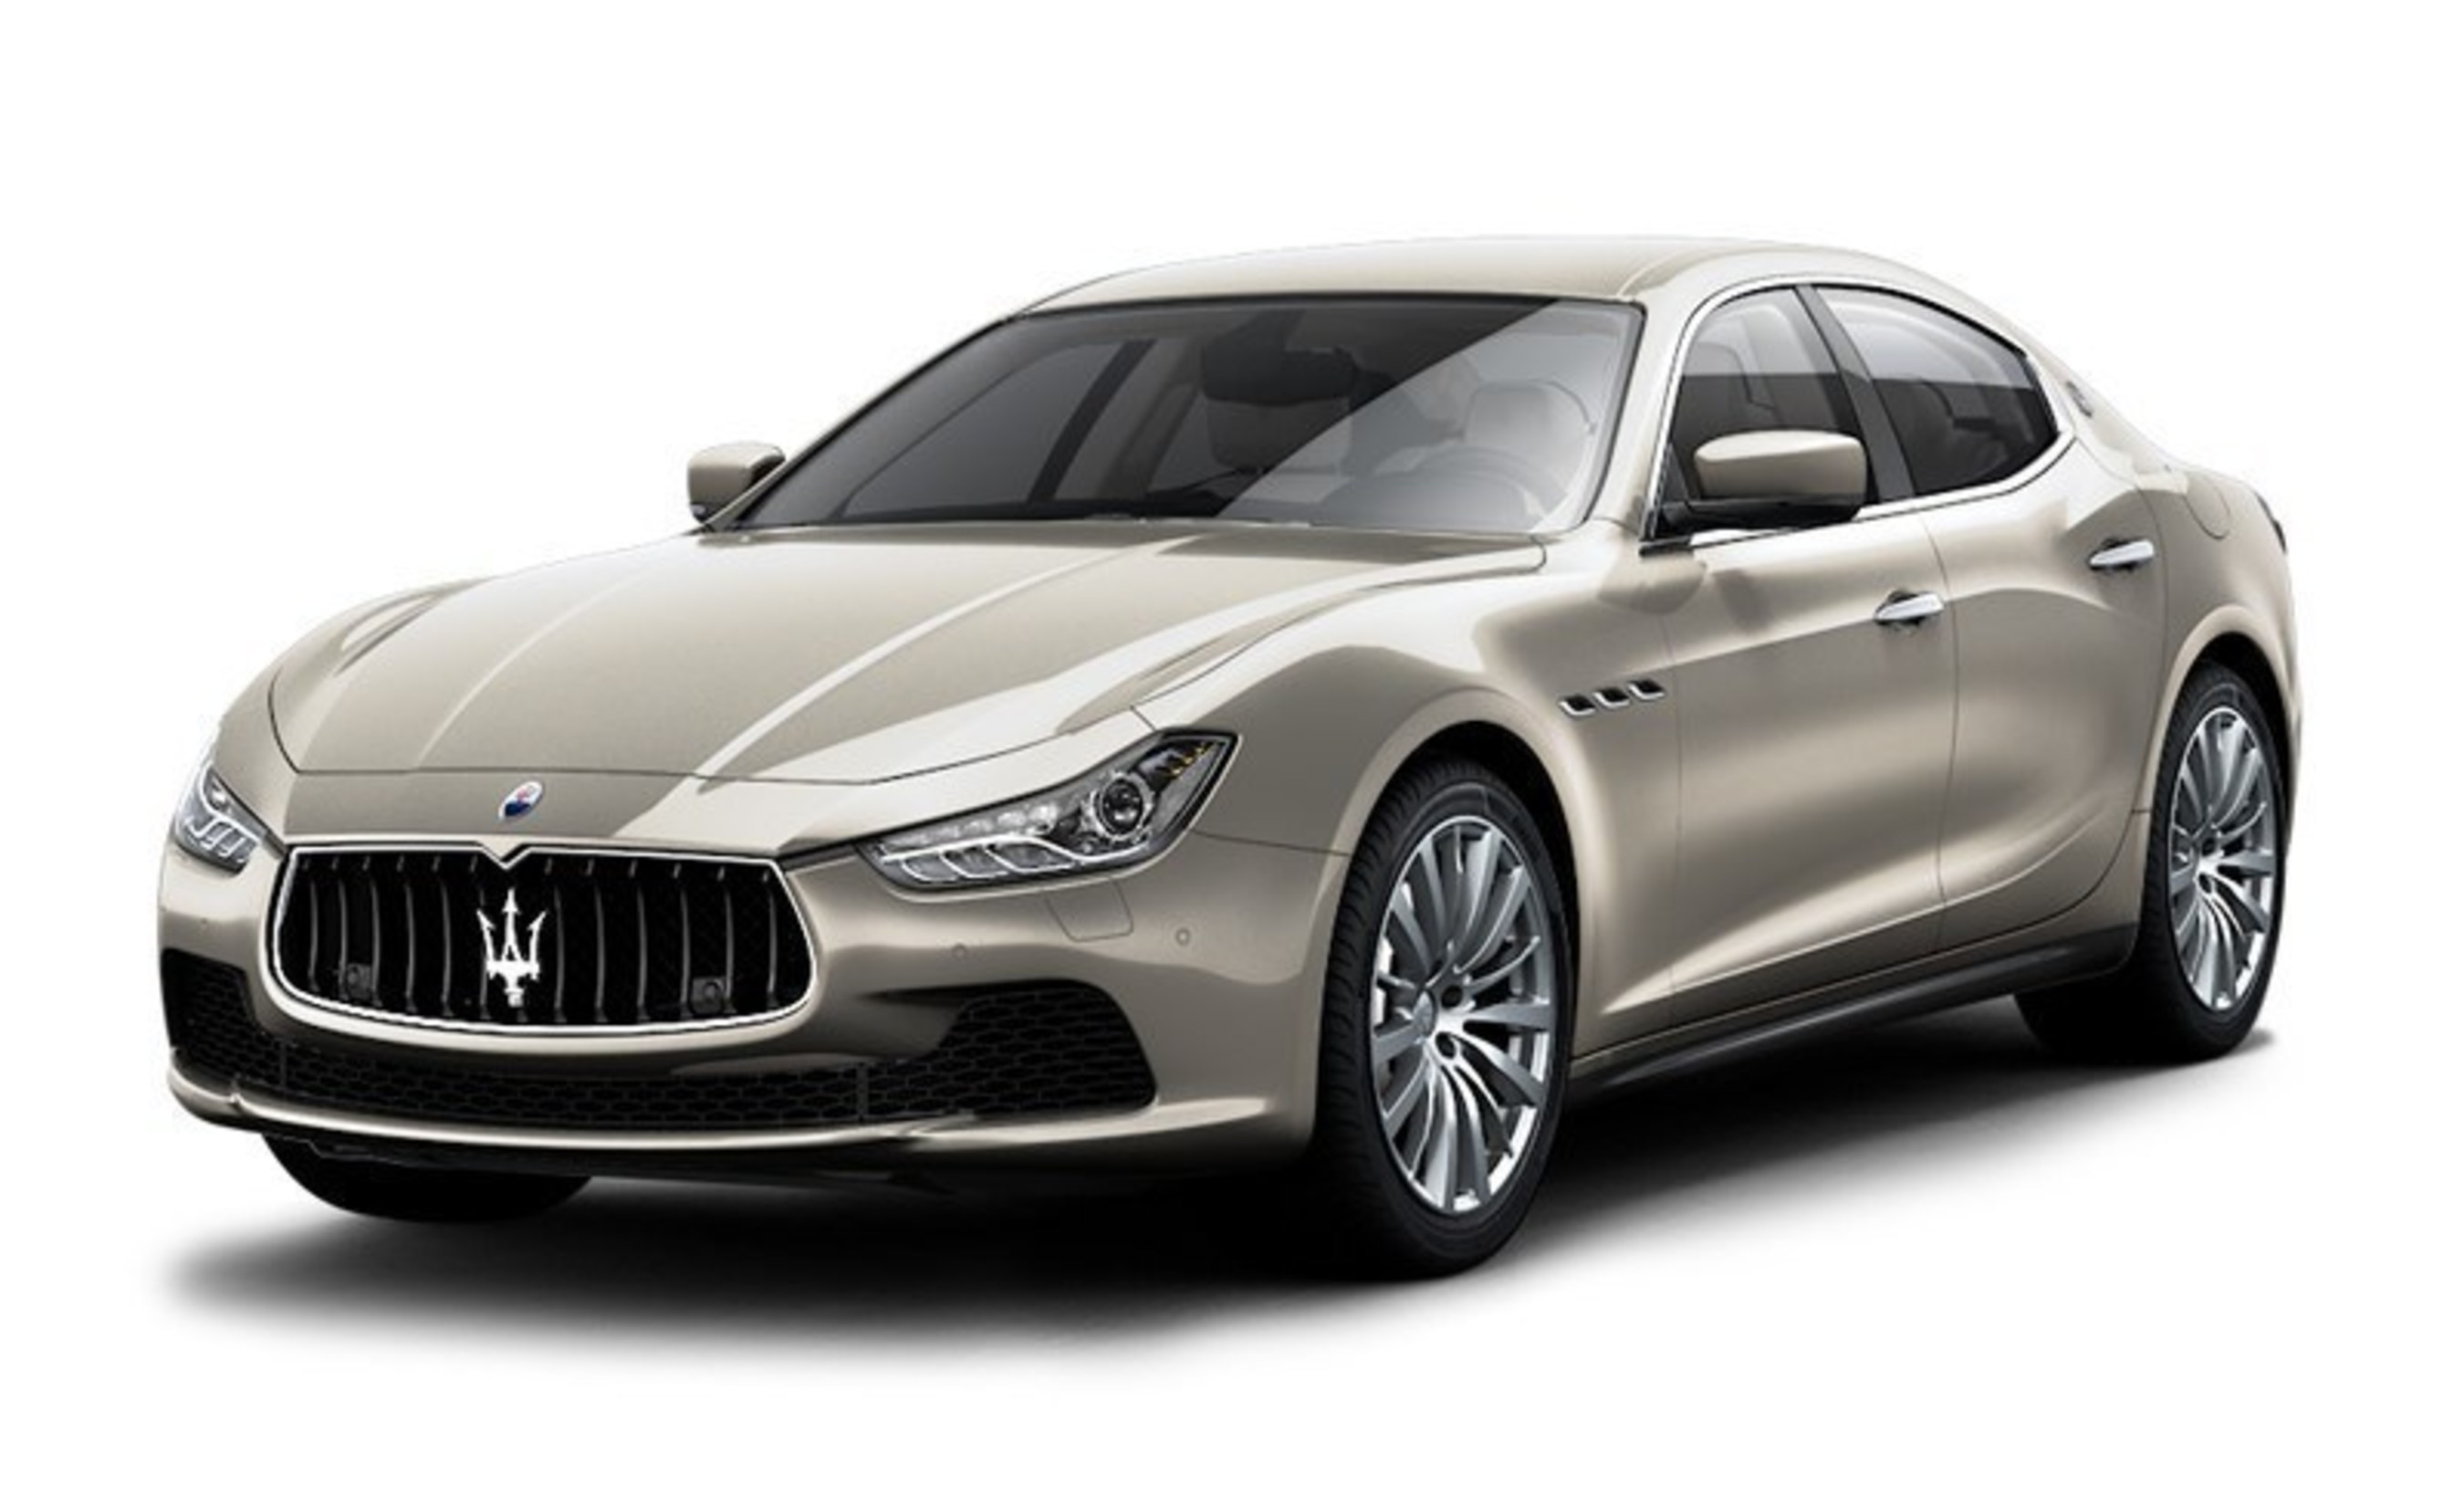 One lucky player will walk away holding the keys to a brand new 2015 Maserati Ghibli.